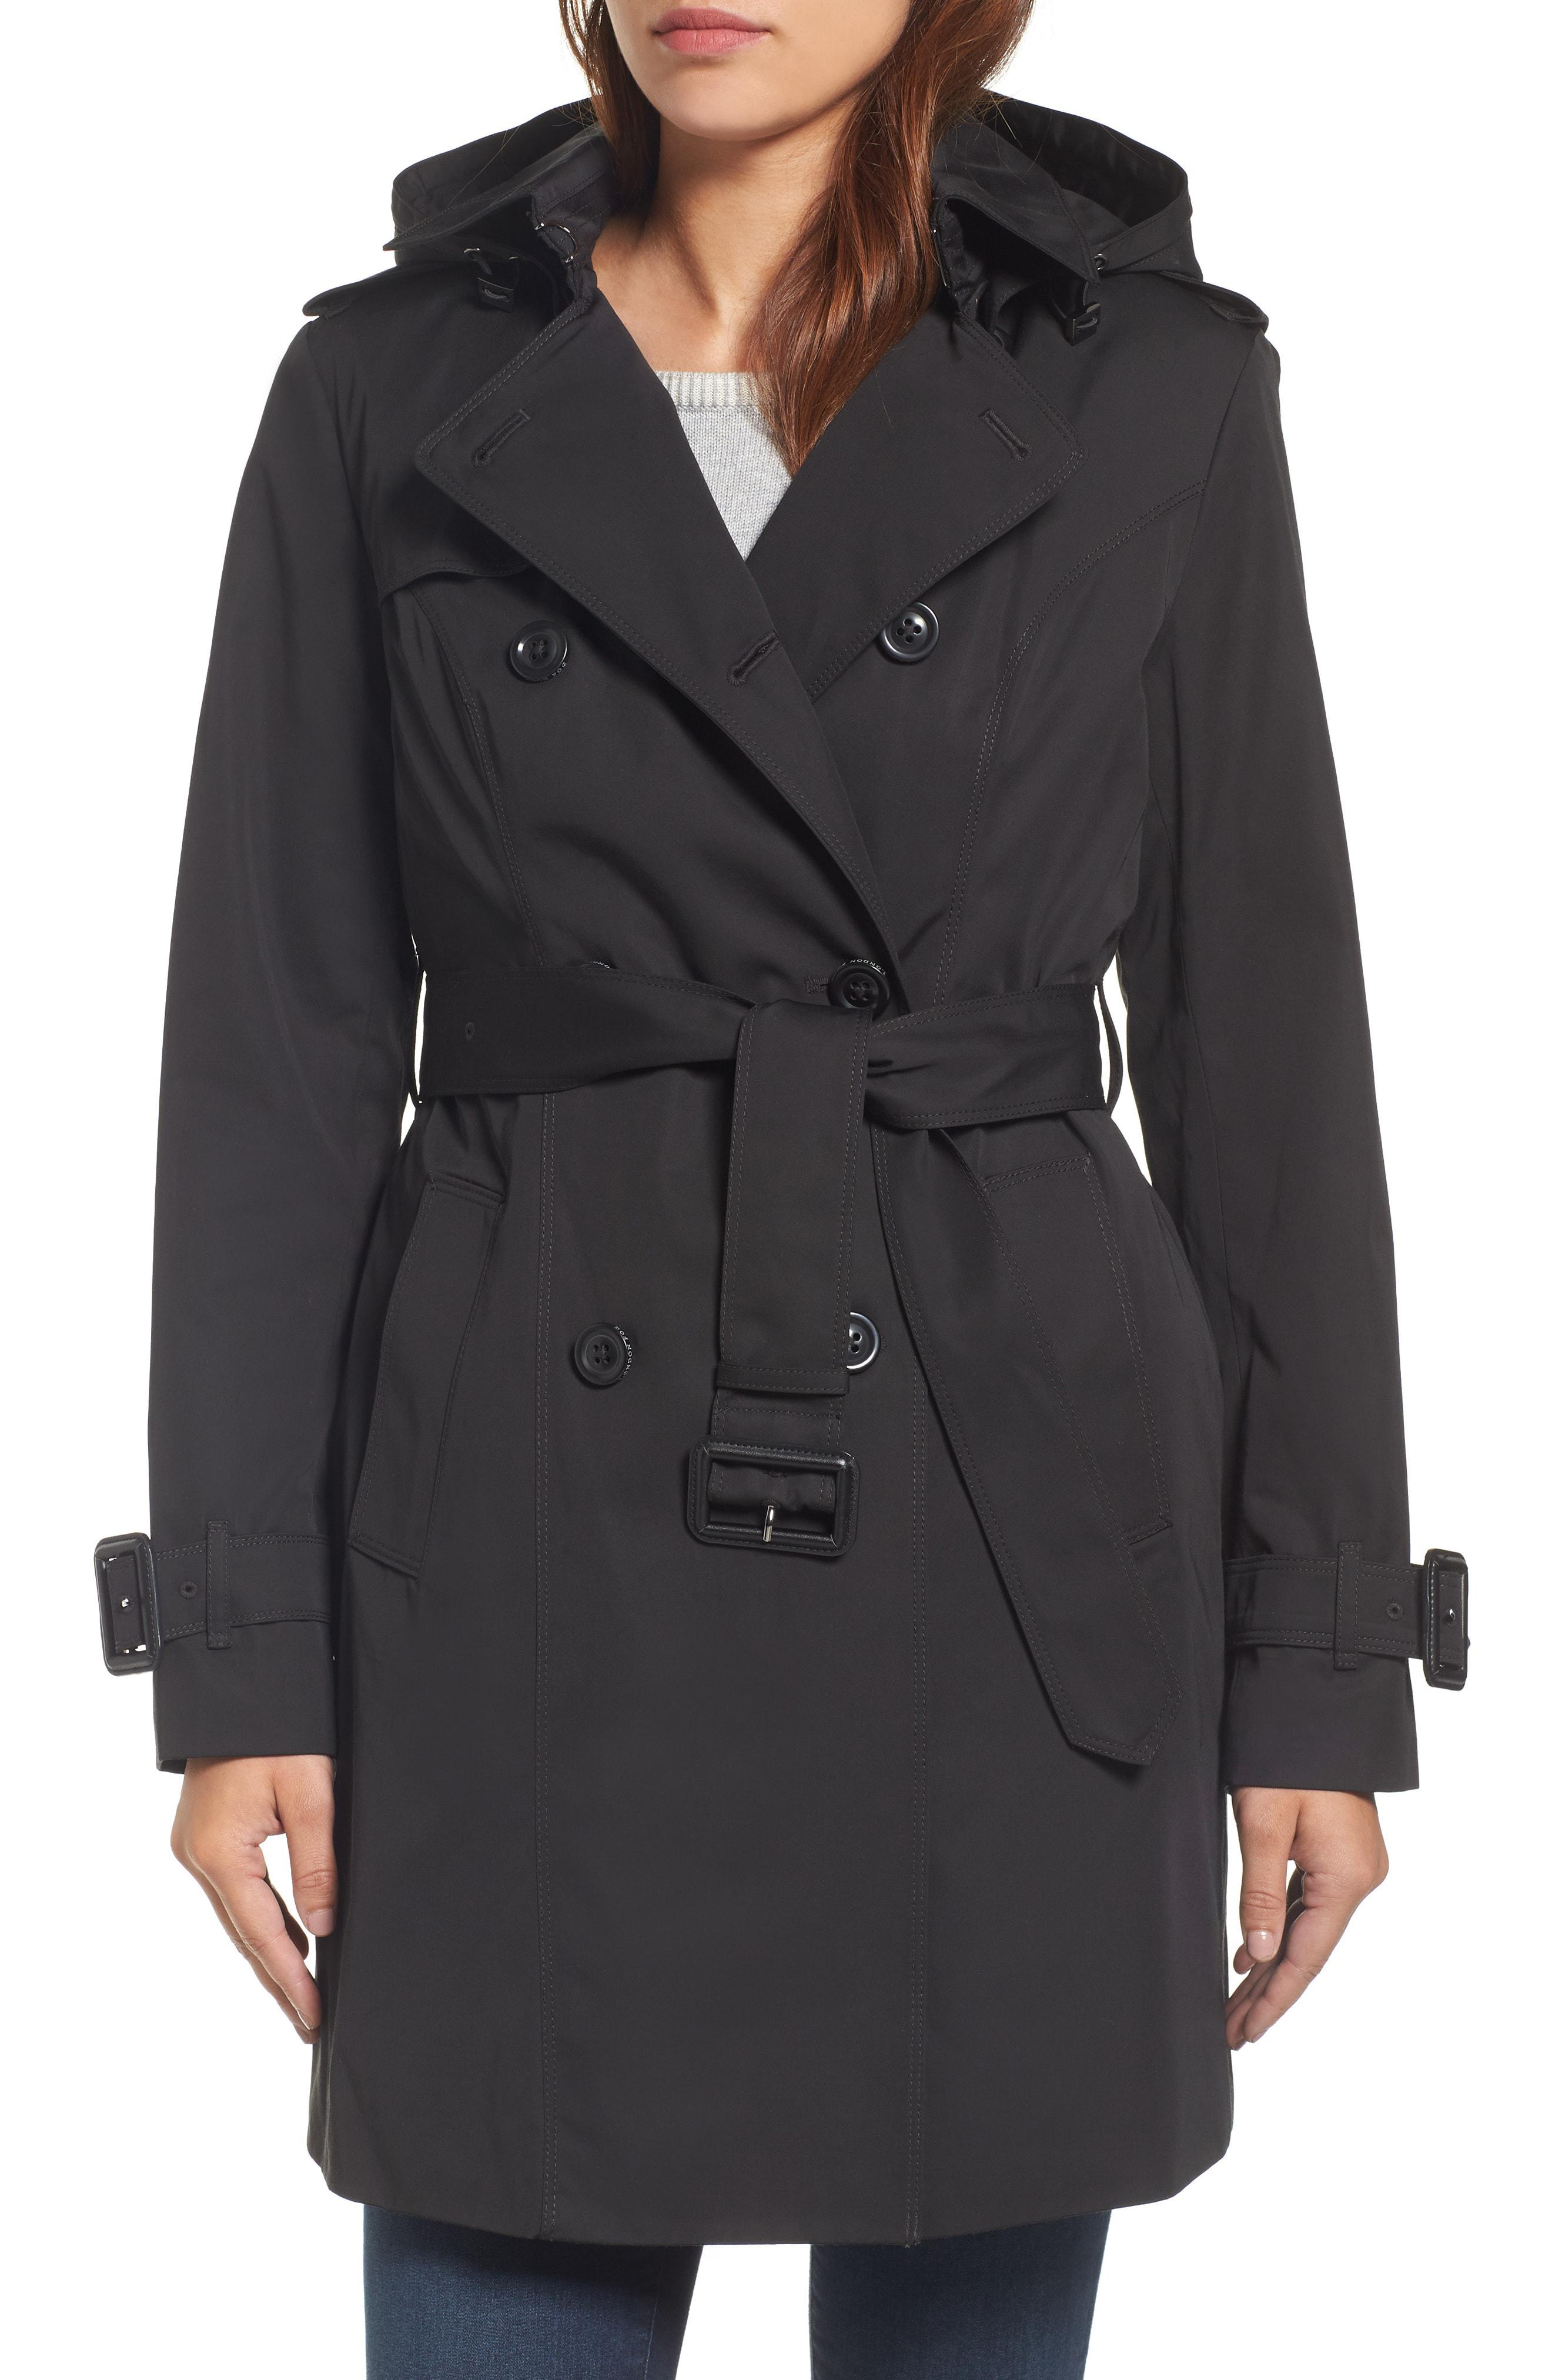 Lyst - London Fog Heritage Trench Coat With Detachable Liner in Black